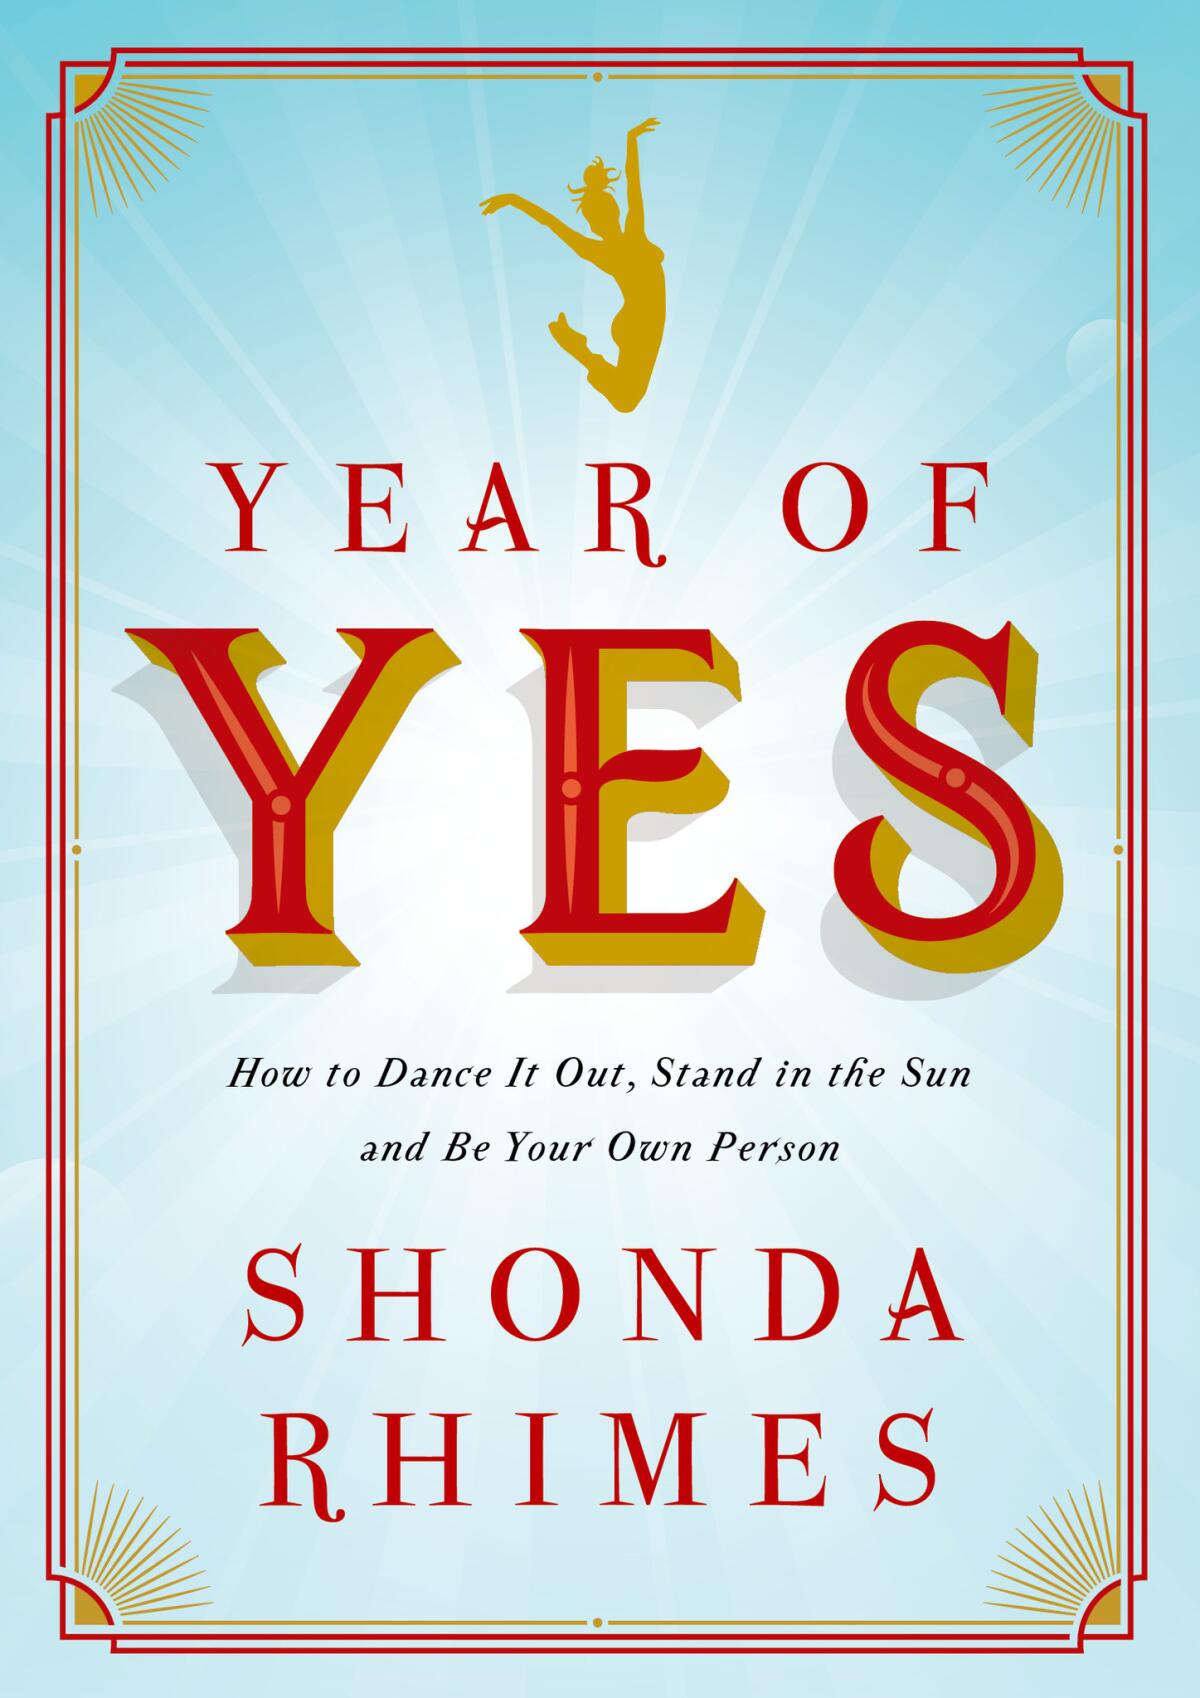 "Year of Yes: How to Dance it Out, Stand in the Sun and Be Your Own Person" by Shonda Rhimes